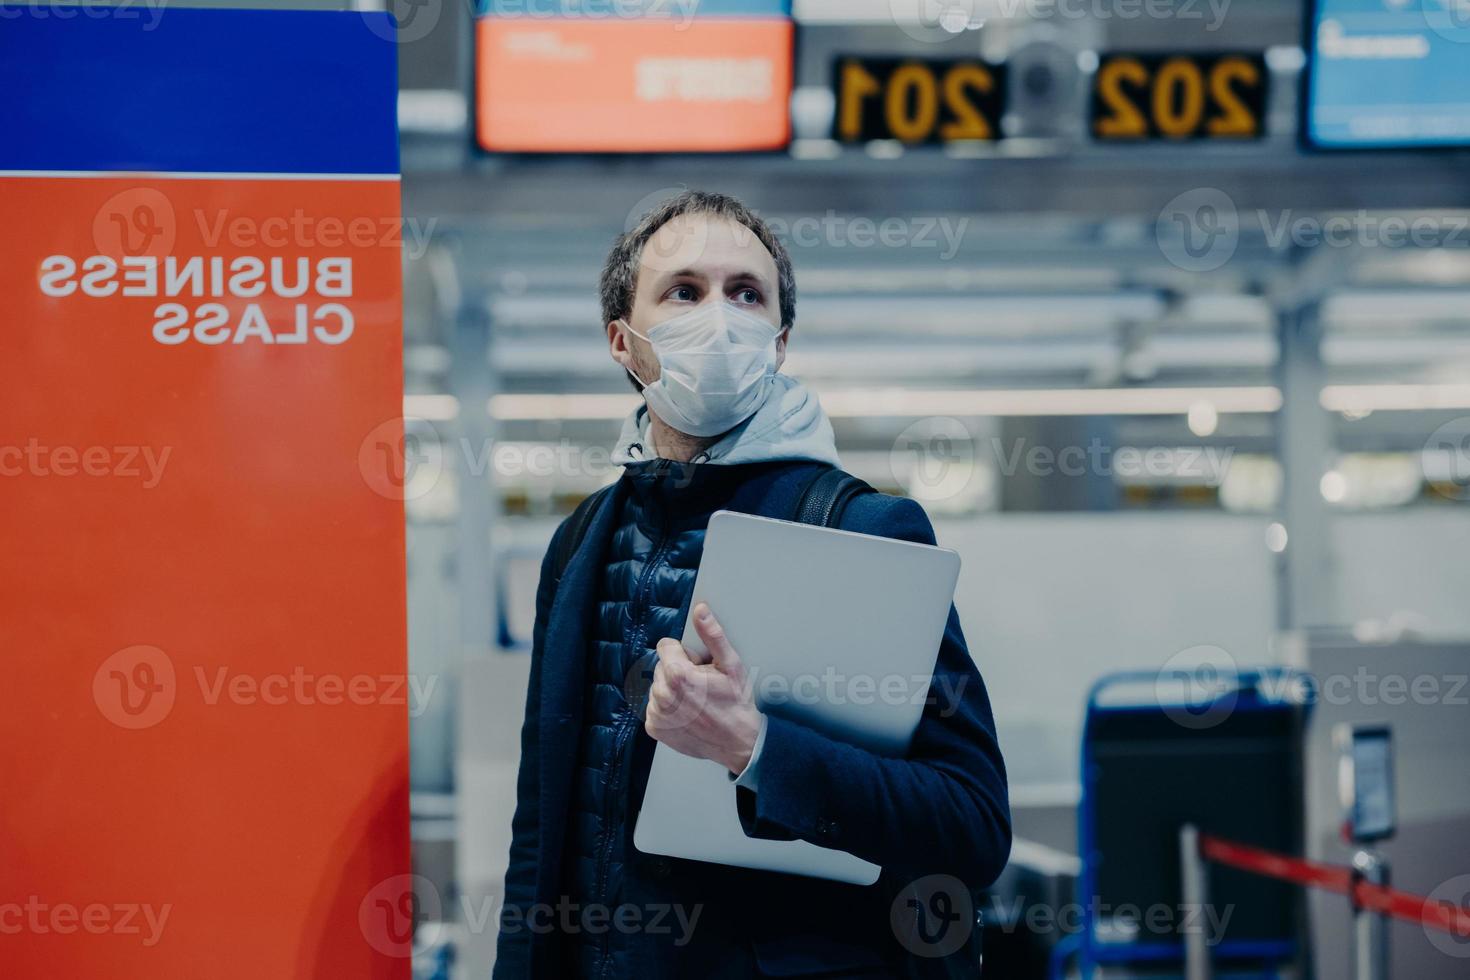 Tourist poses in airport, wants to return home during quarantine and world pandemia, wears protective medical mask against coronavirus, avoids infection and virus spreading. Traveling during outbreak photo